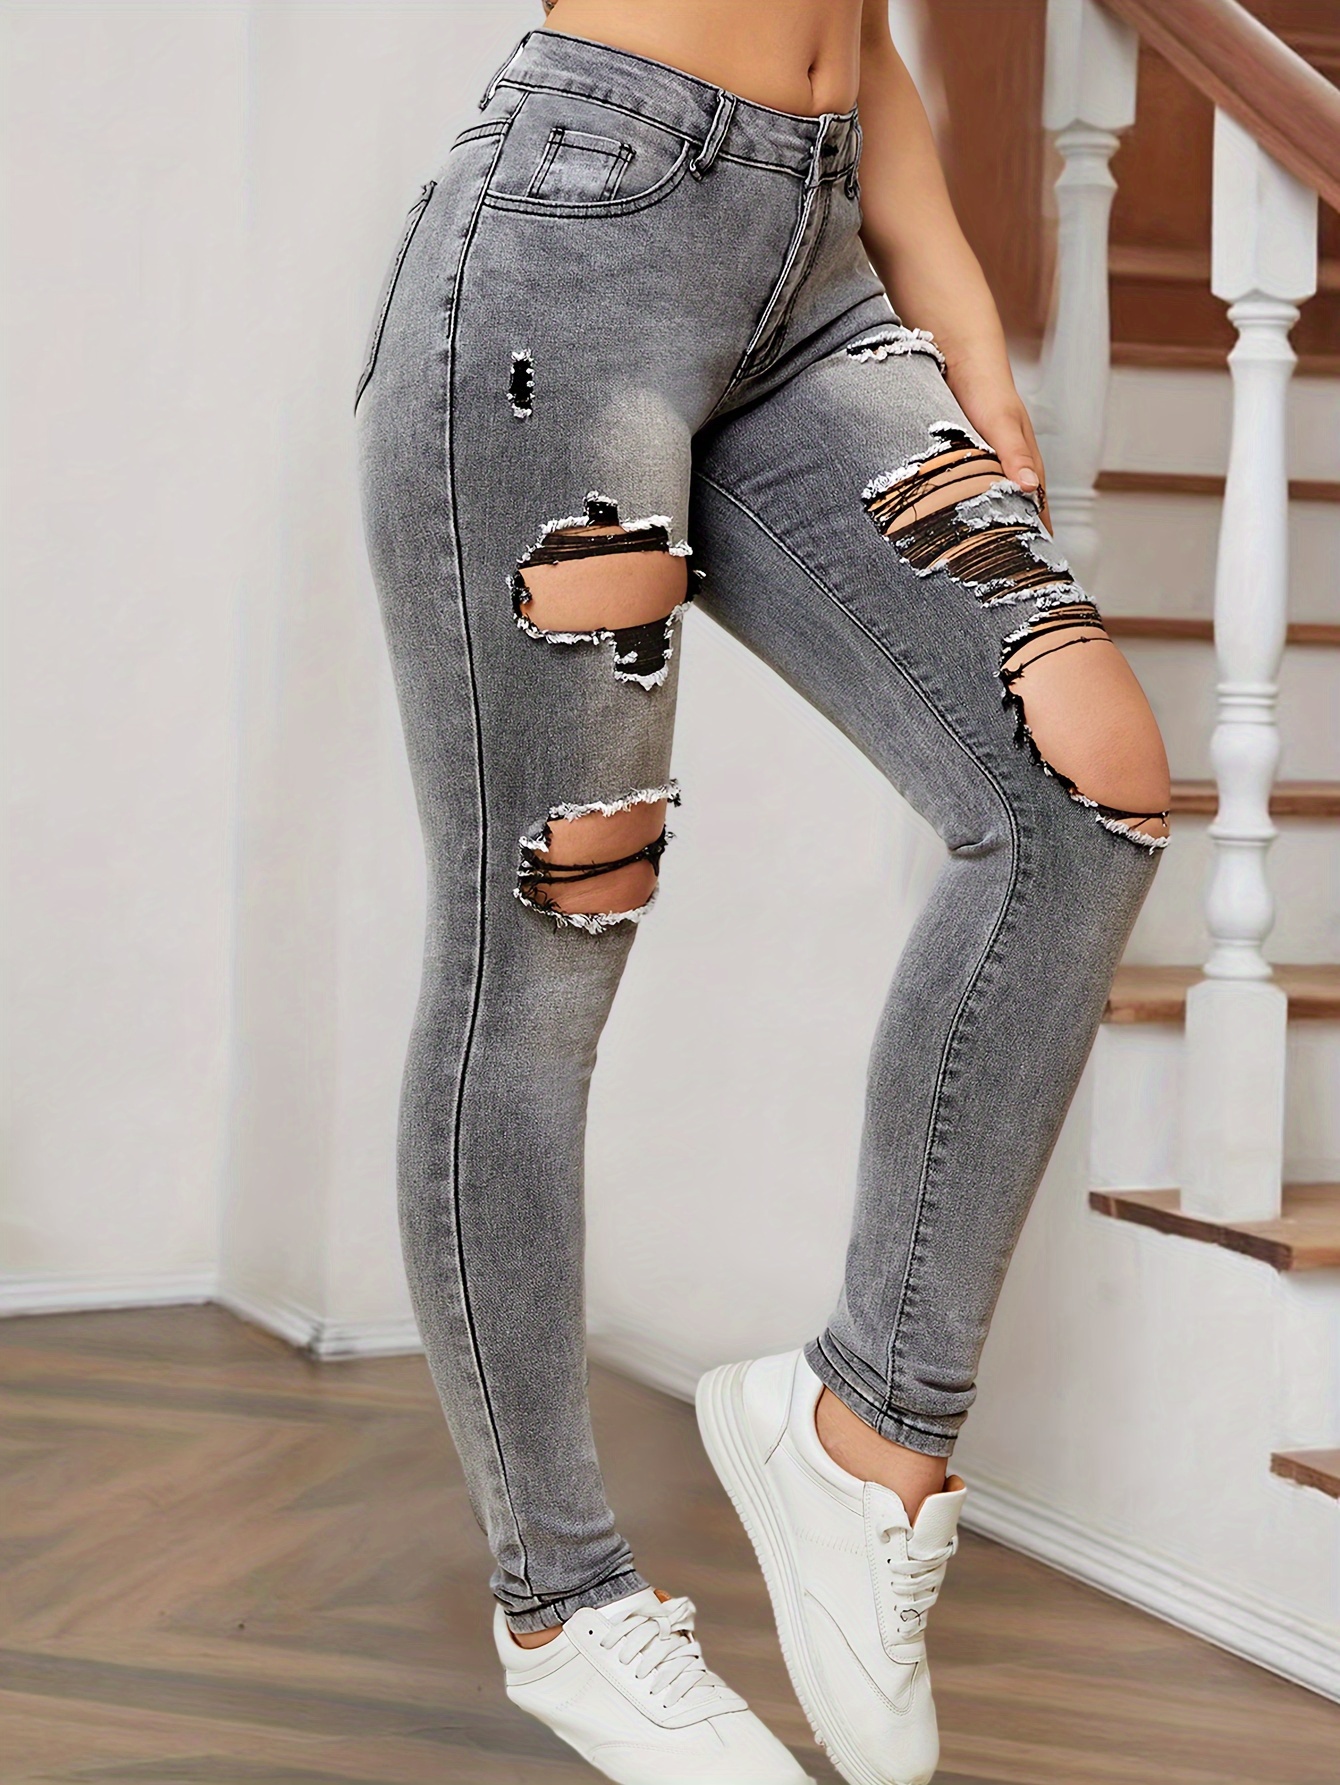 Ripped Holes Washed Skinny Jeans, Slim Fit High Stretch Distressed